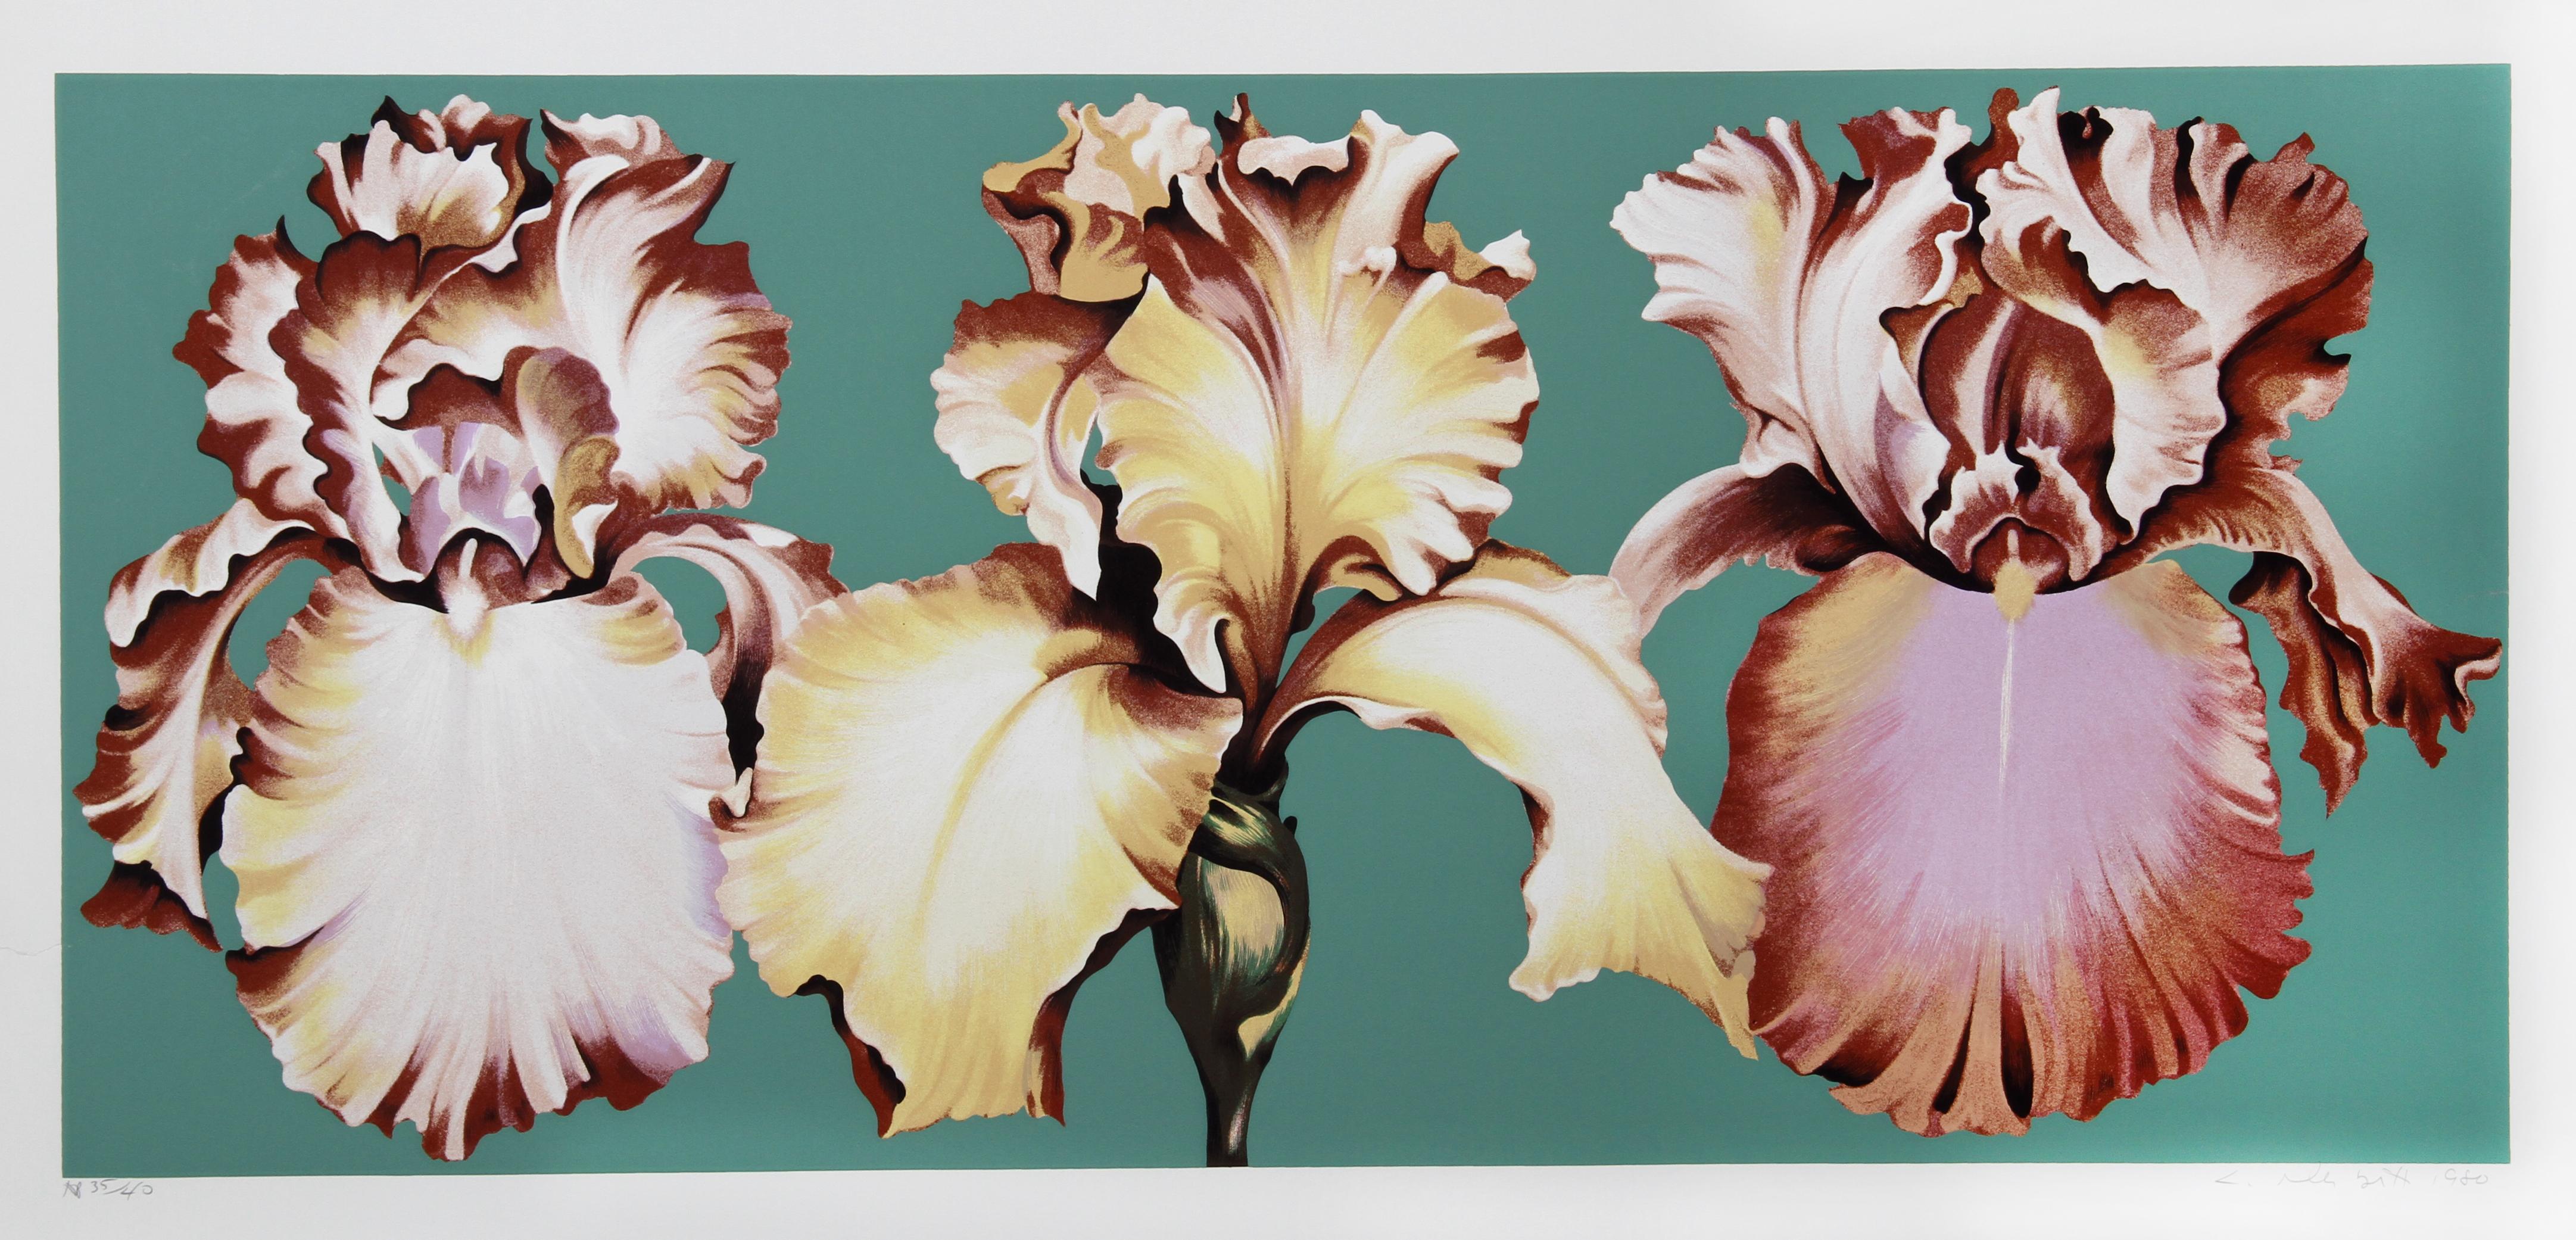 Artist: Lowell Blair Nesbitt, American (1933 - 1993)
Title: Three Irises on Green
Year: 1980
Medium: Serigraph, signed and numbered in pencil
Edition: AP 40
Image Size: 20 x 44 inches
Size: 27 x 47 in. (68.58 x 119.38 cm)